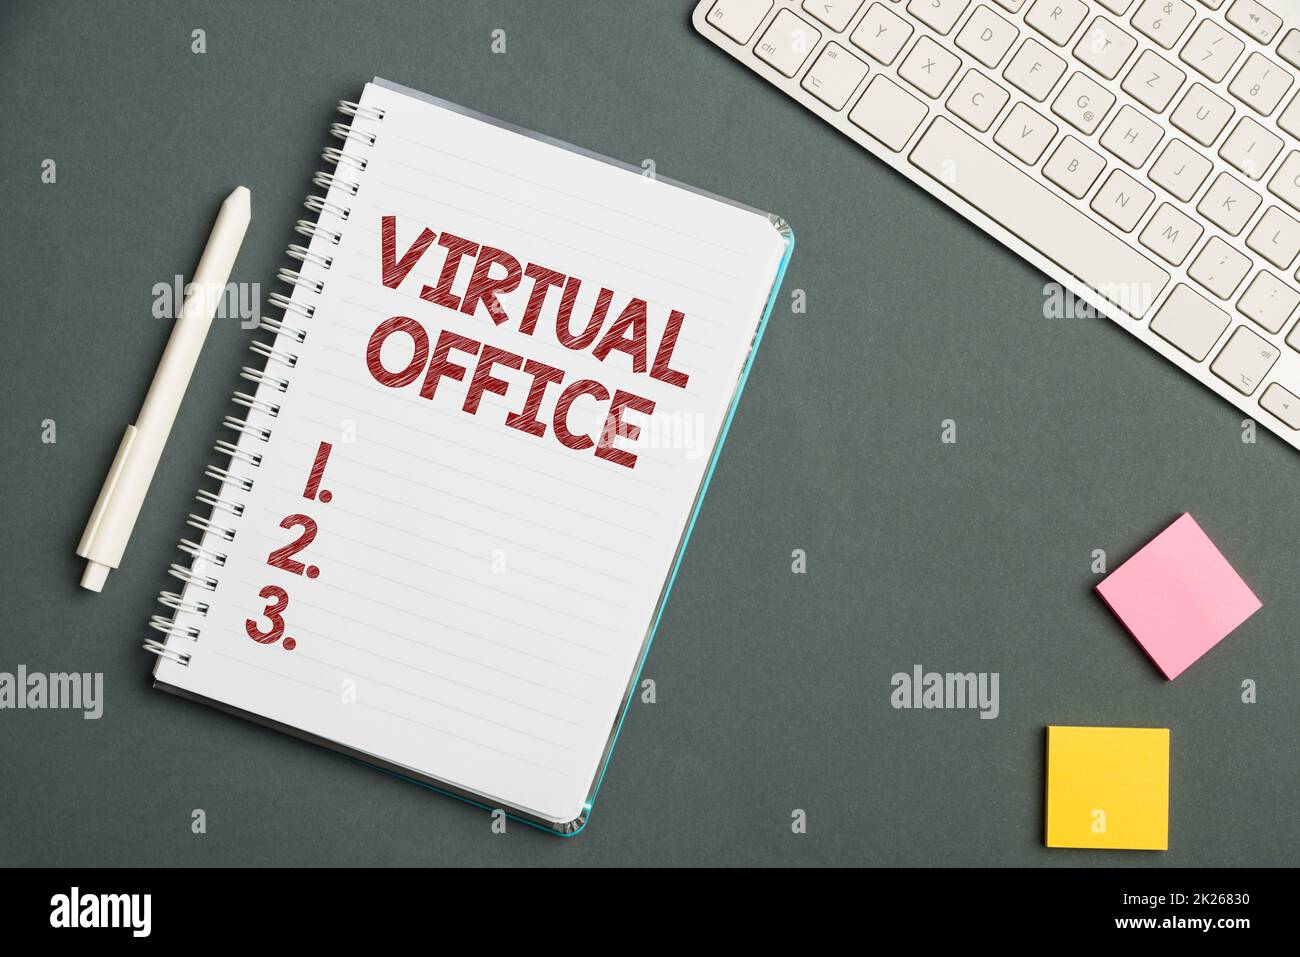 Sign displaying Virtual Office. Business approach operational domain of any business or organization virtually Keyboard Over A Table Beside A Notebook And Pens With Sticky Notes Stock Photo